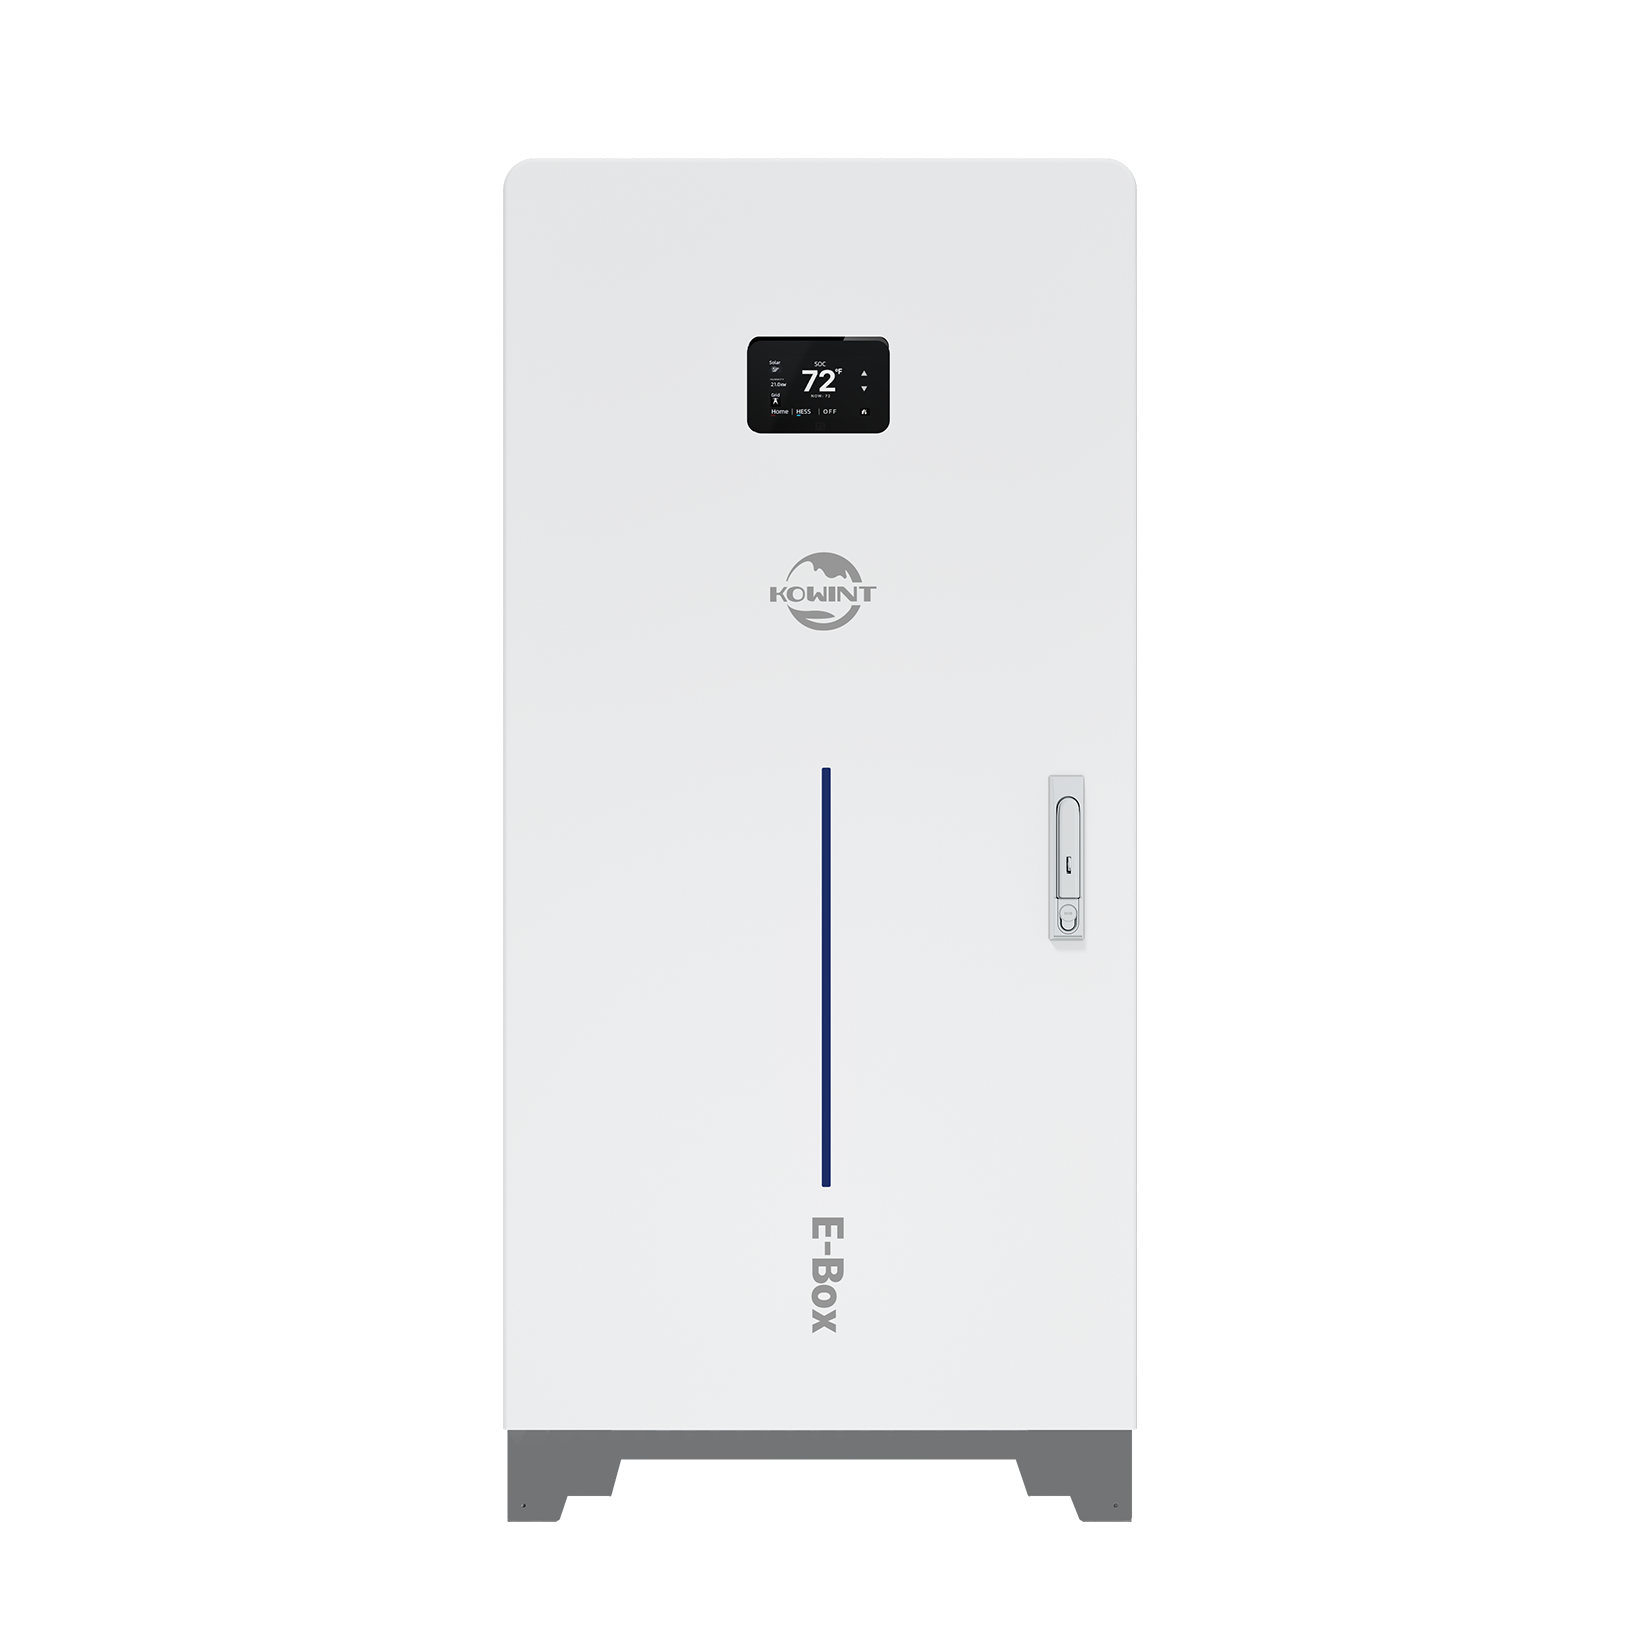 E-BOX all-in-one energy storage